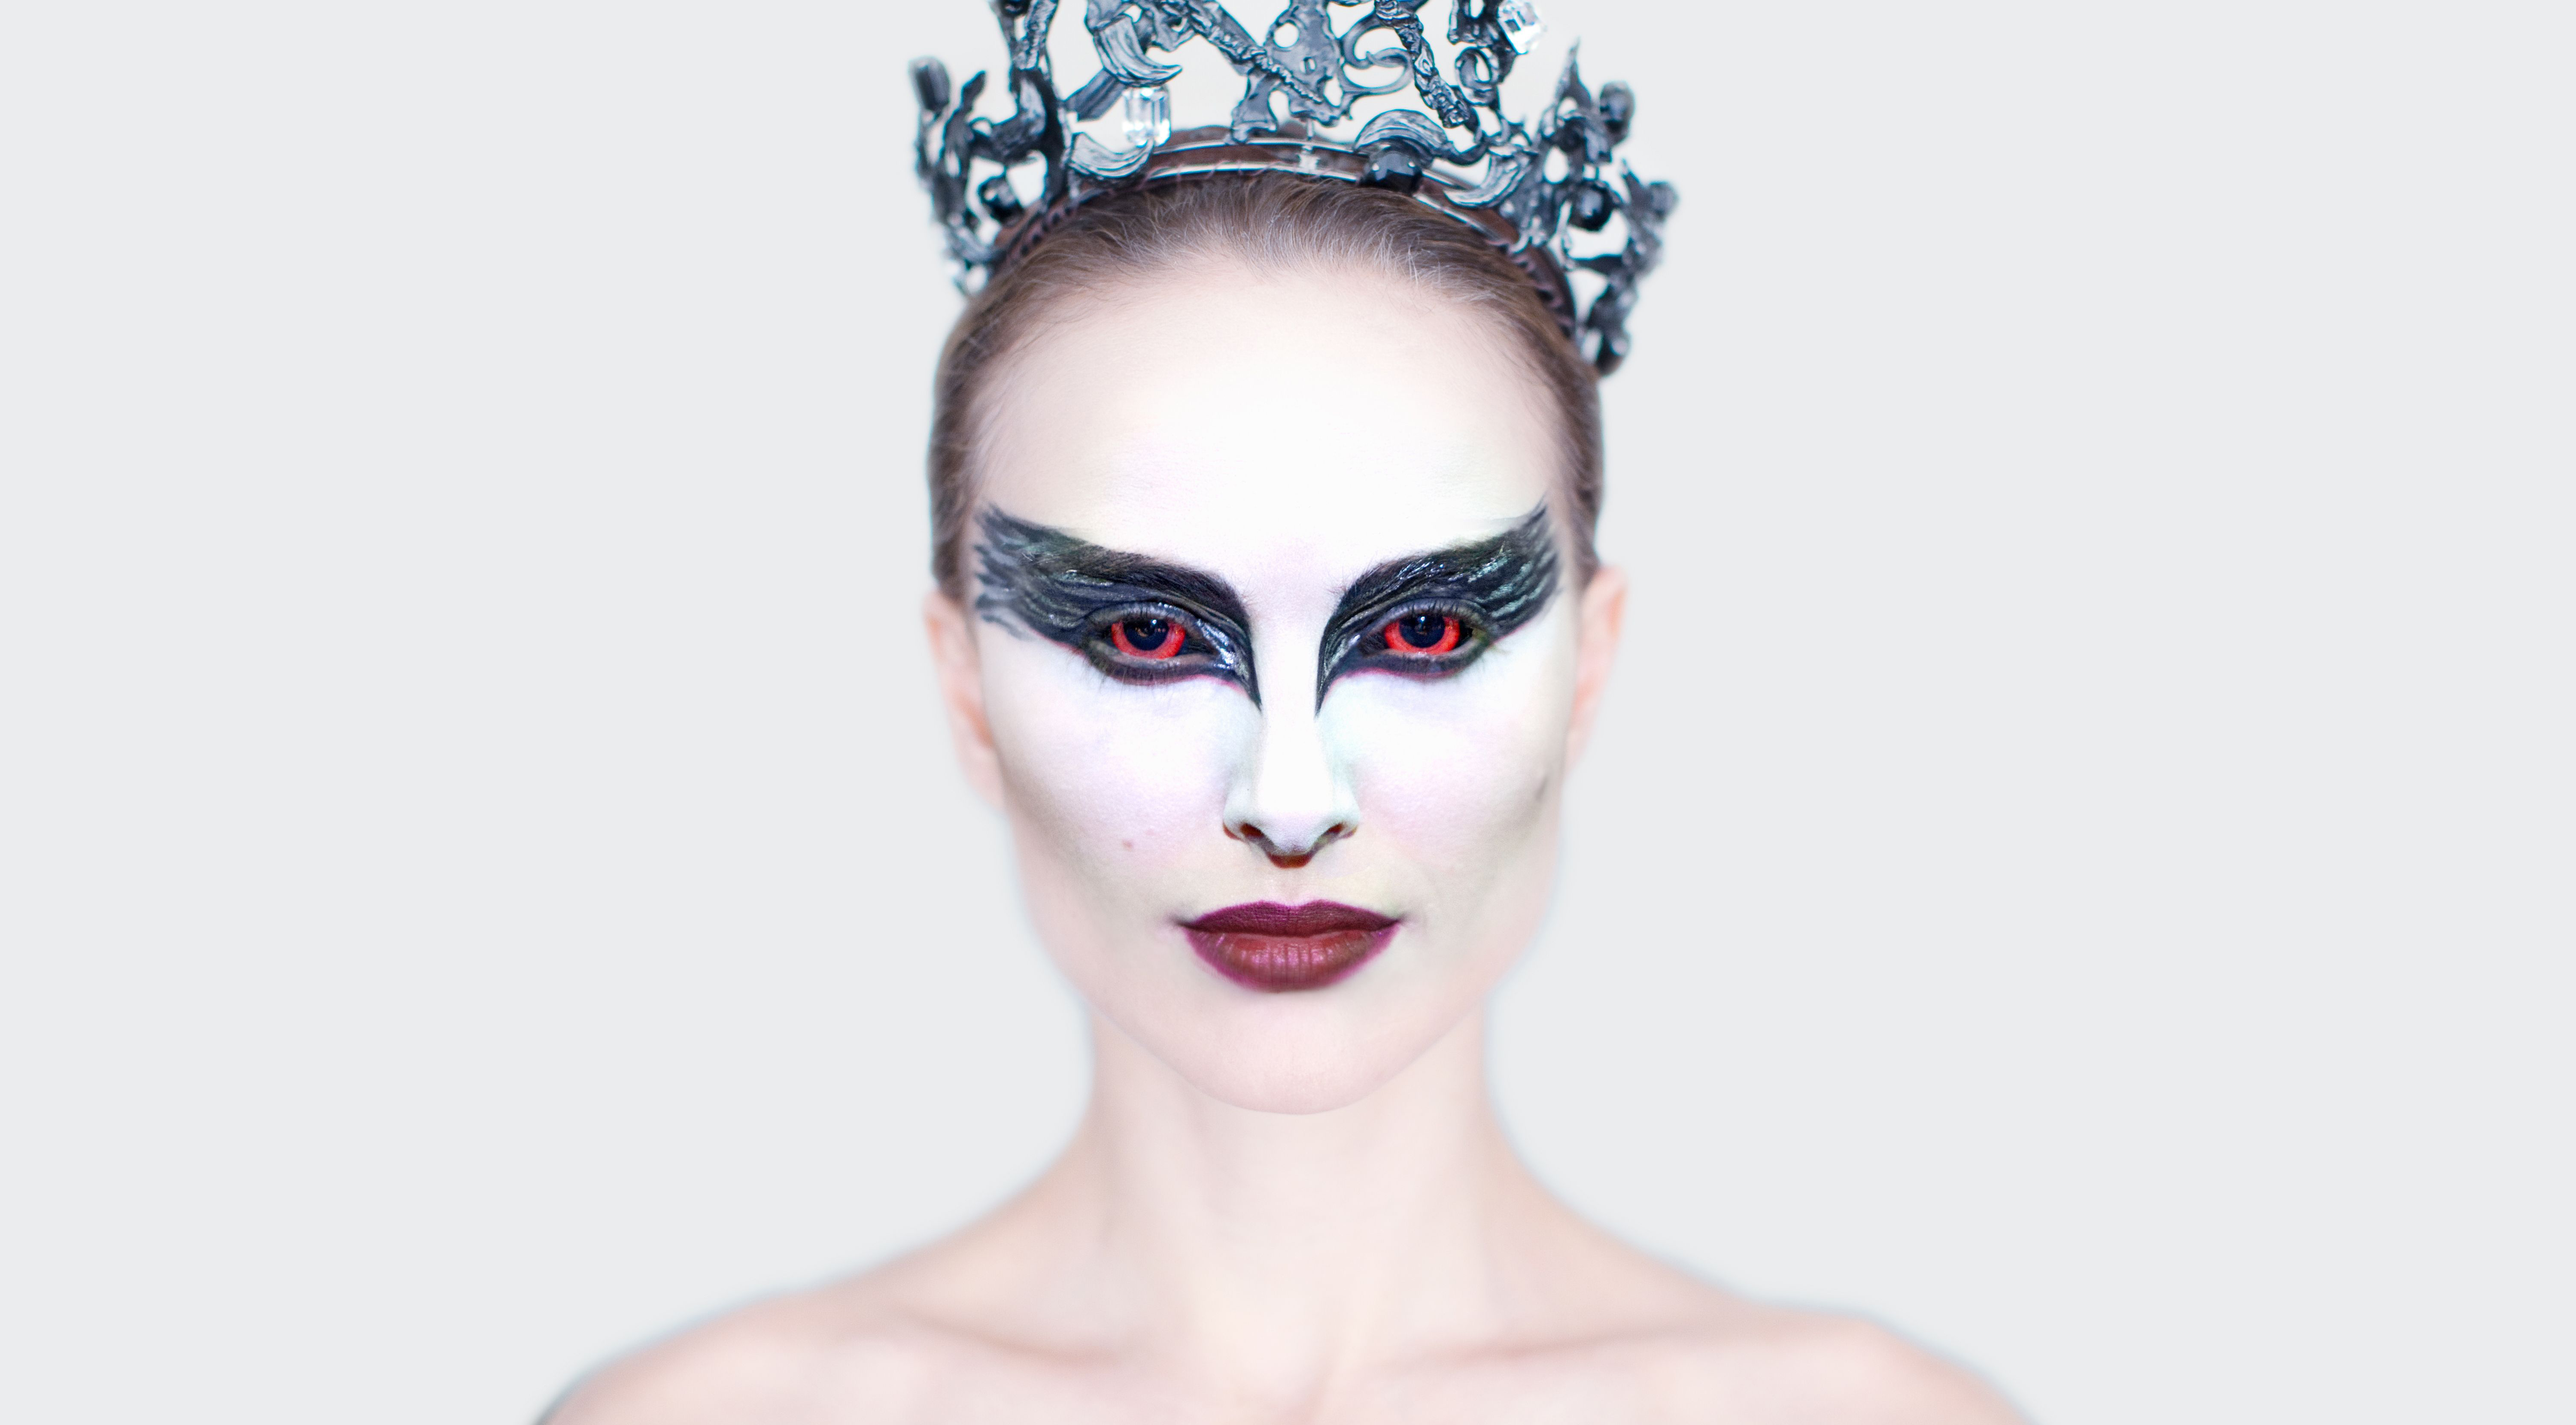 Balerina with a crown, red contact lenses, and thick black makeup around her eyes